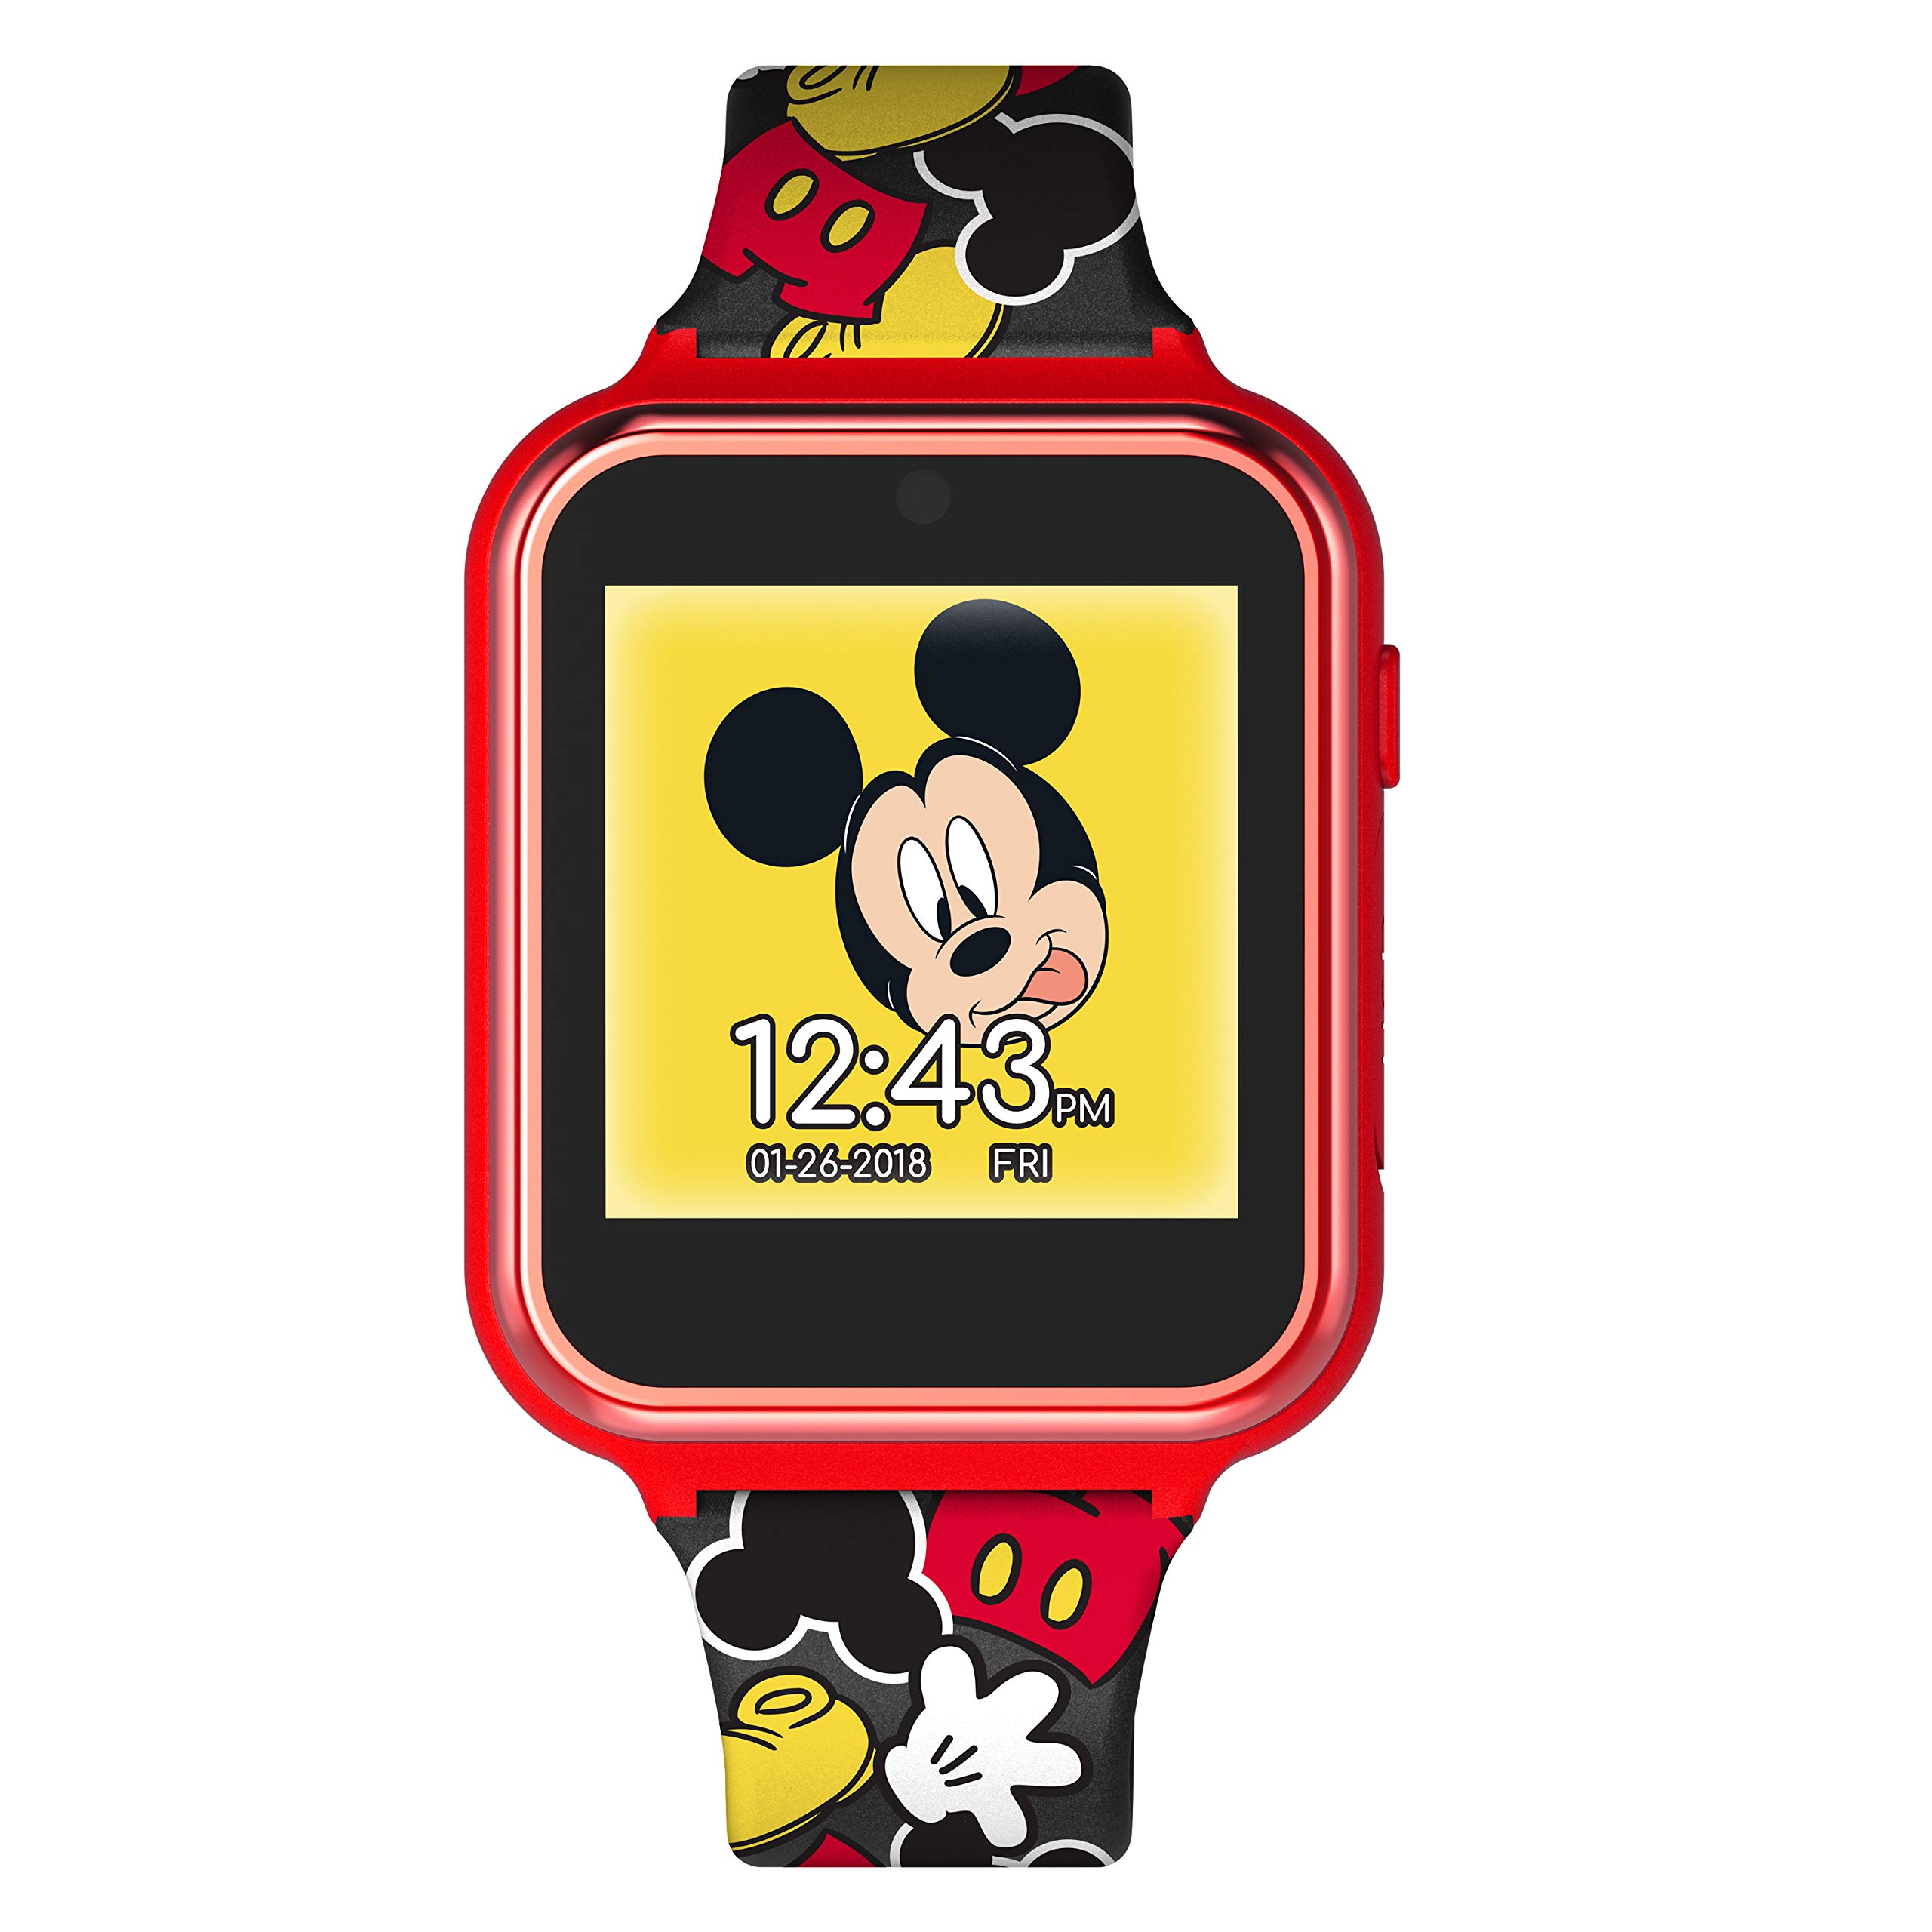 Accutime Kids Disney Mickey Mouse Red Black Educational Learning Touchscreen Smart Watch Toy for Boys, Girls, Toddlers - Selfie Cam, Learning Games, Alarm, Calculator, Pedometer (Model: MK4089AZ)